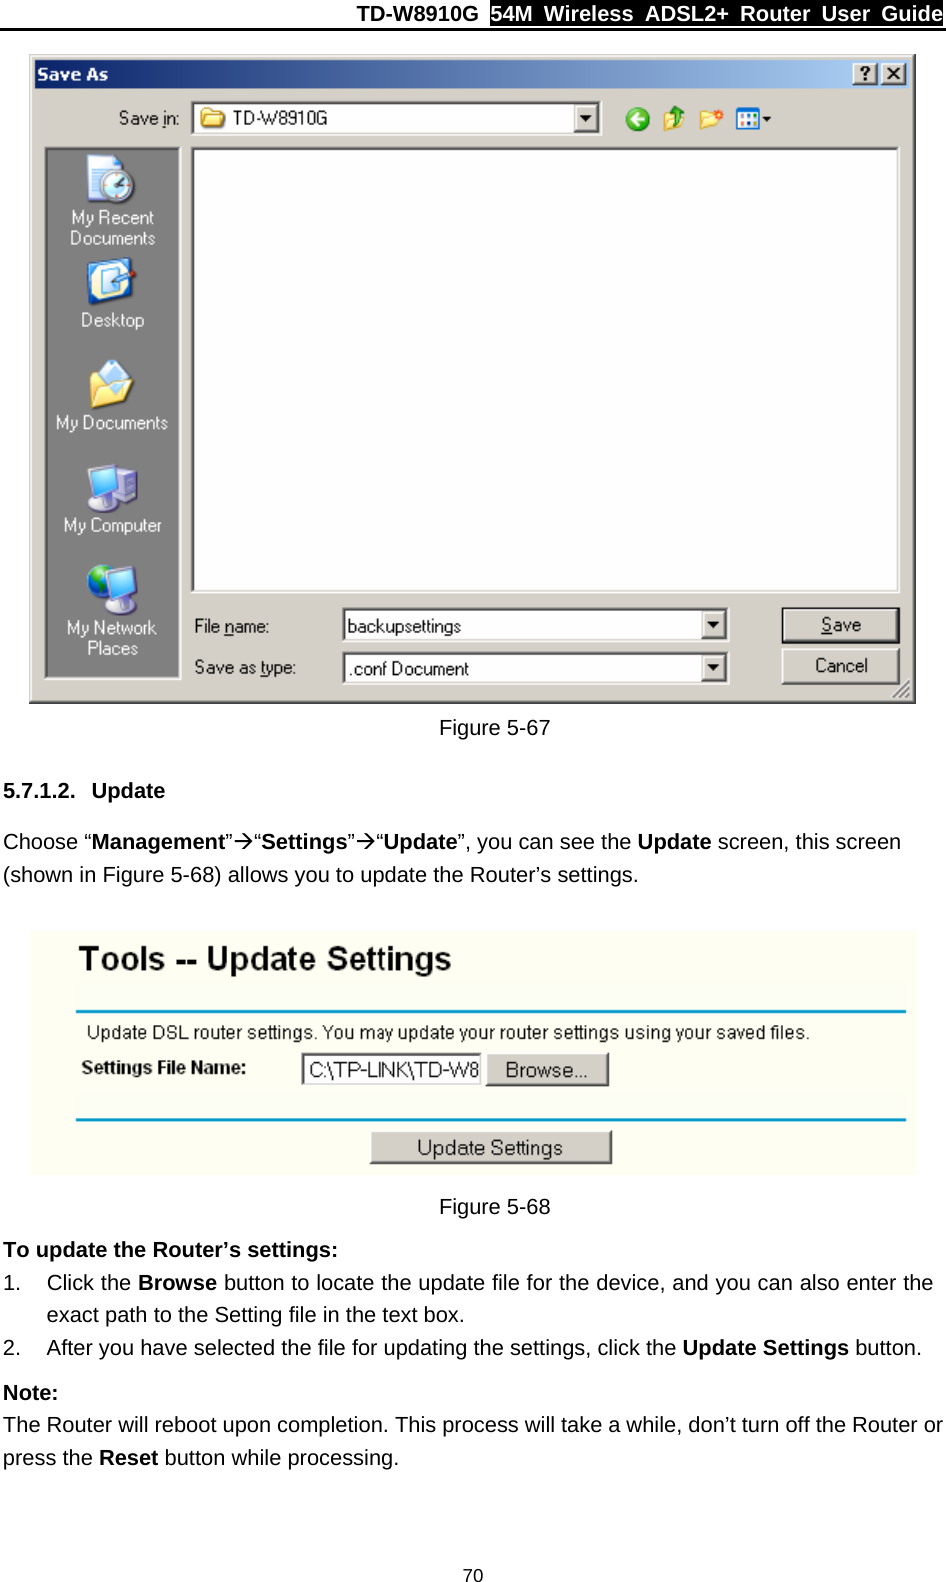 TD-W8910G  54M Wireless ADSL2+ Router User Guide  70 Figure 5-67 5.7.1.2. Update Choose “Management”Æ“Settings”Æ“Update”, you can see the Update screen, this screen (shown in Figure 5-68) allows you to update the Router’s settings.    Figure 5-68 To update the Router’s settings: 1. Click the Browse button to locate the update file for the device, and you can also enter the exact path to the Setting file in the text box. 2.  After you have selected the file for updating the settings, click the Update Settings button. Note: The Router will reboot upon completion. This process will take a while, don’t turn off the Router or press the Reset button while processing. 